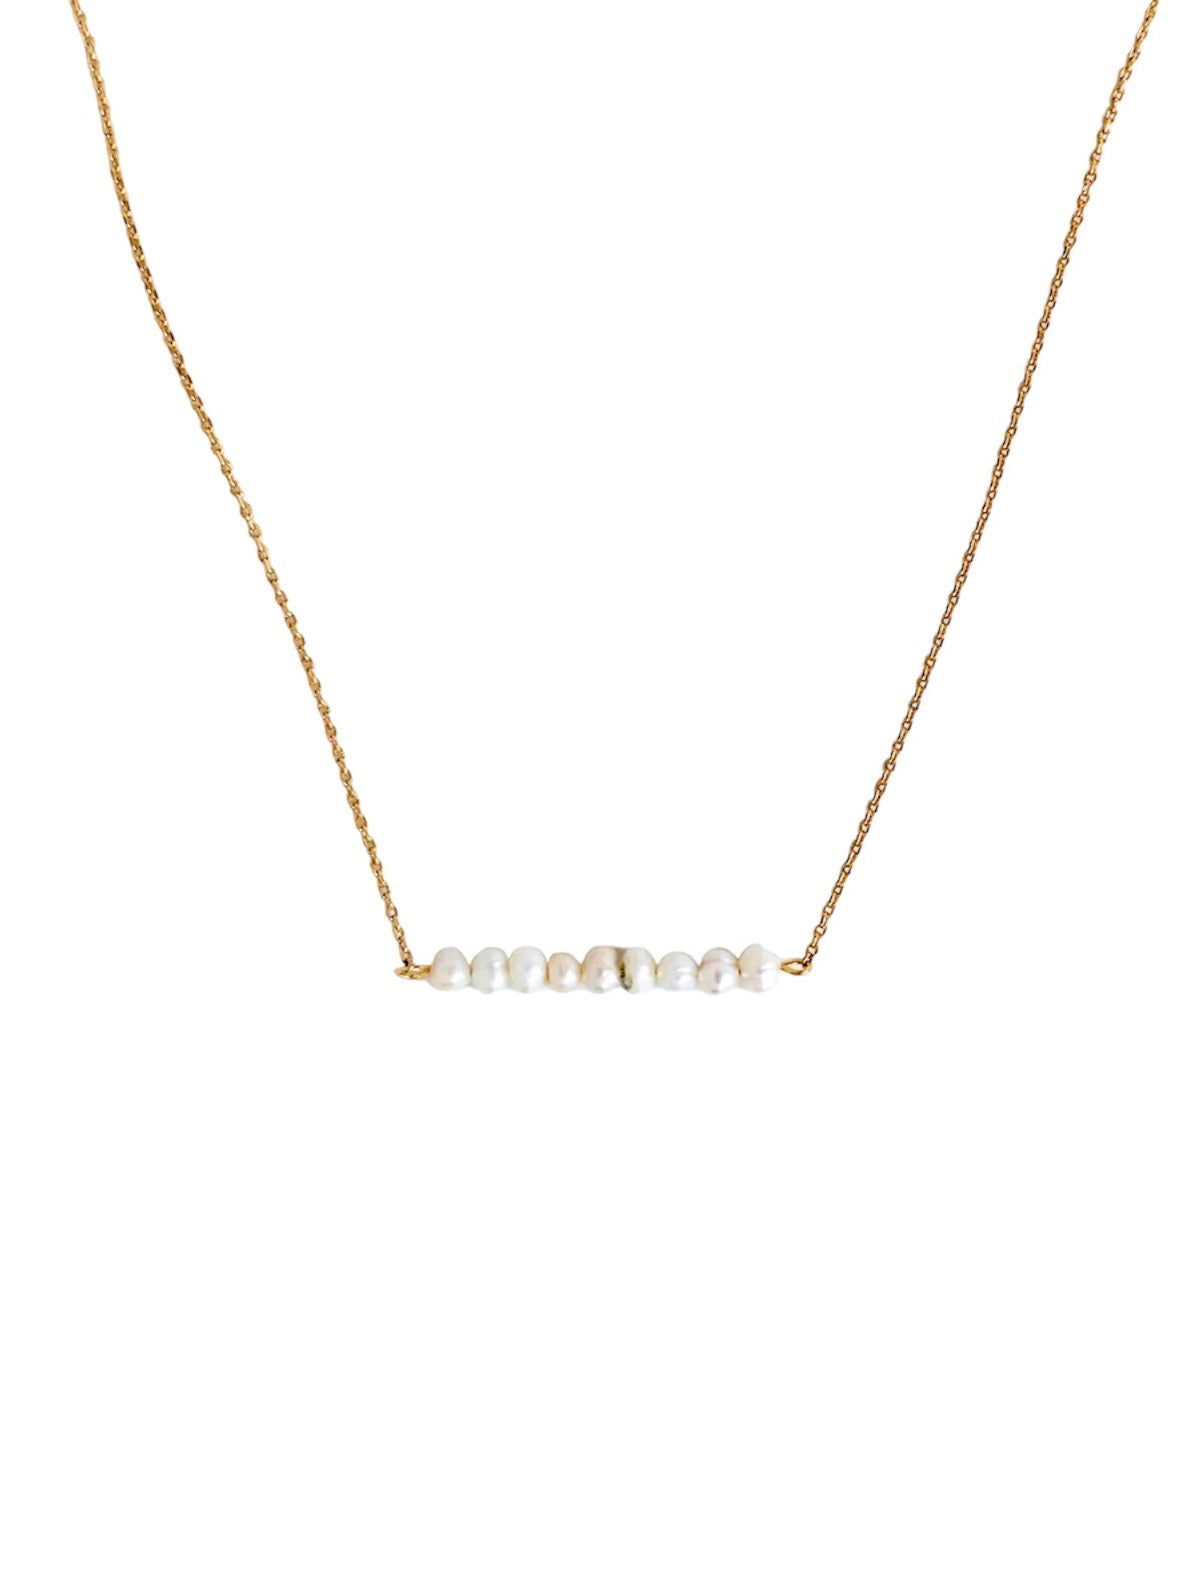 Ellie Necklace | Michelle McDowell Gold